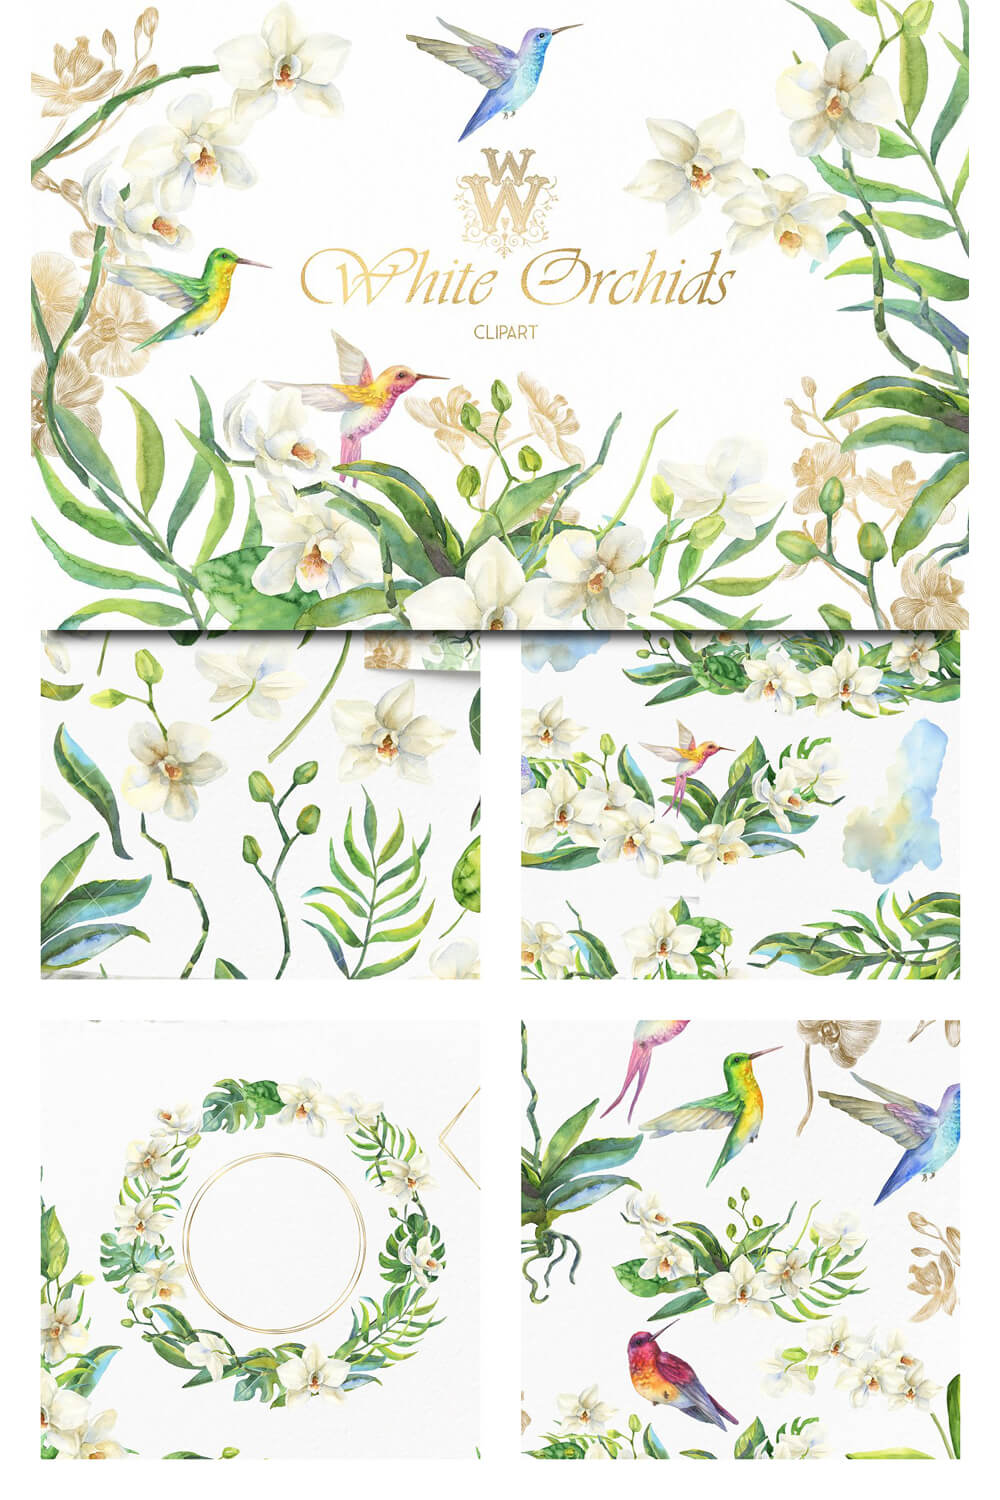 Large and small slides of white orchids and hummingbirds.